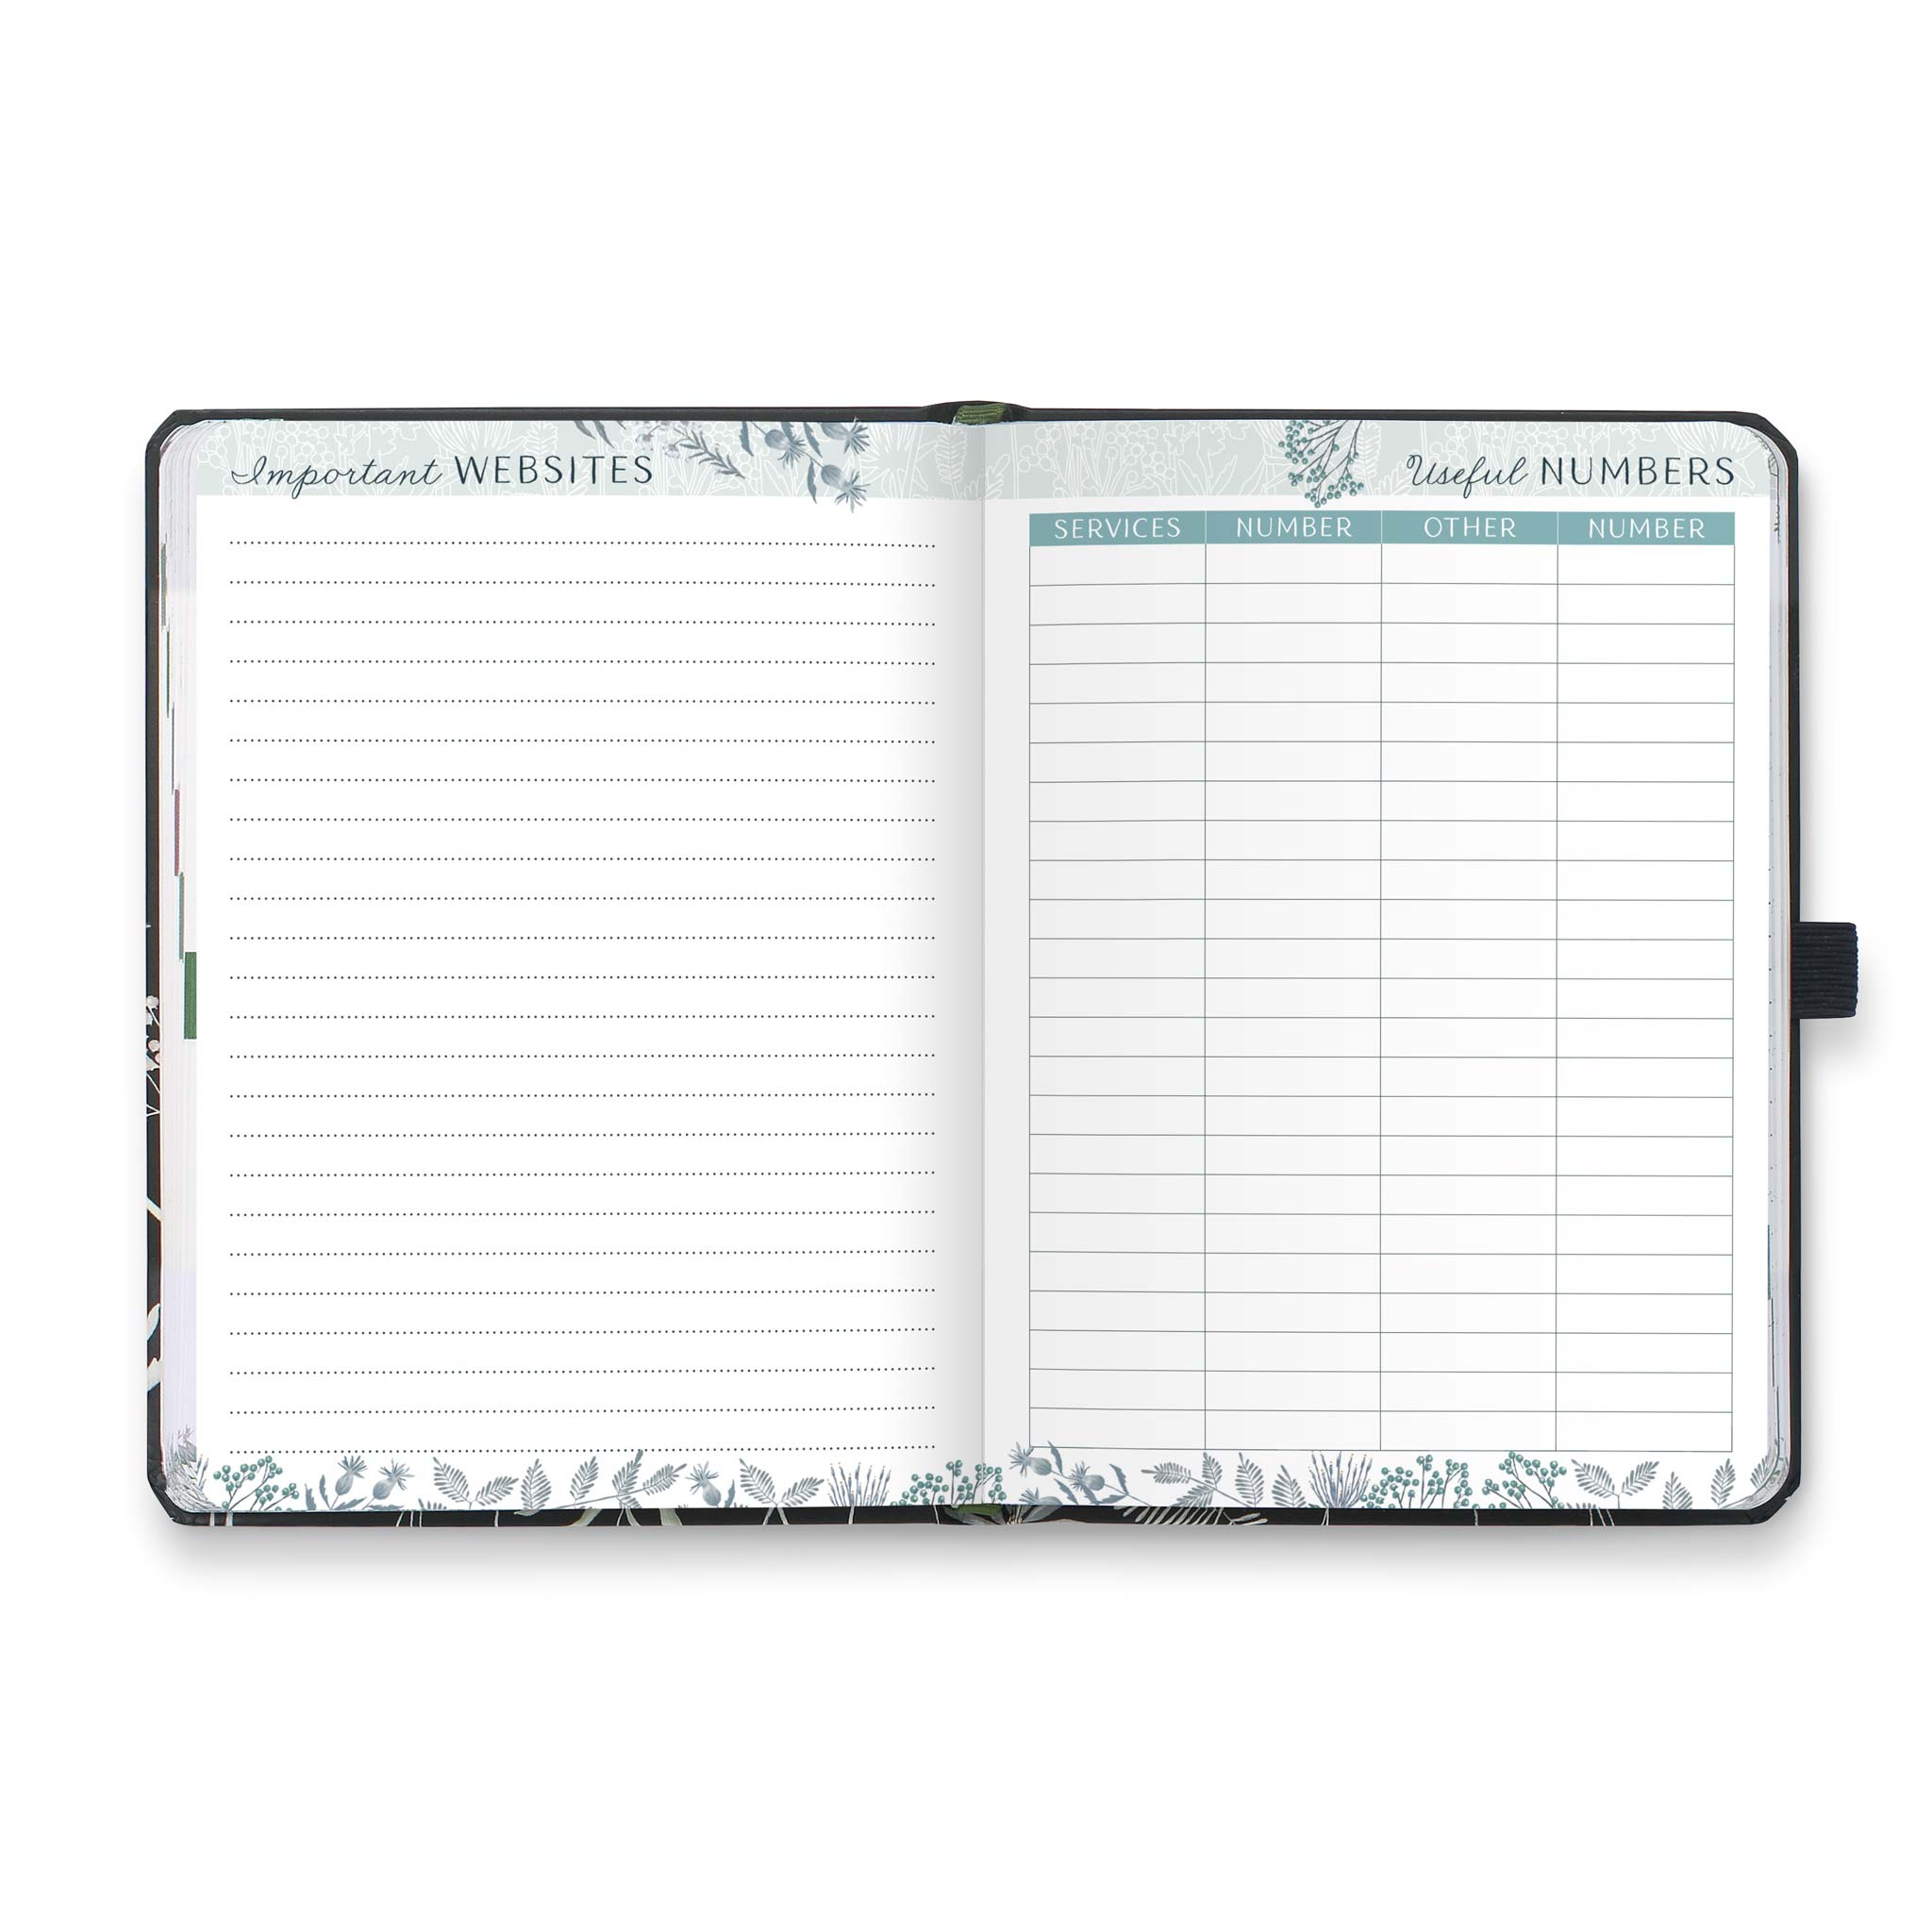 An open diary planner with a page for Important websites and a useful numbers page